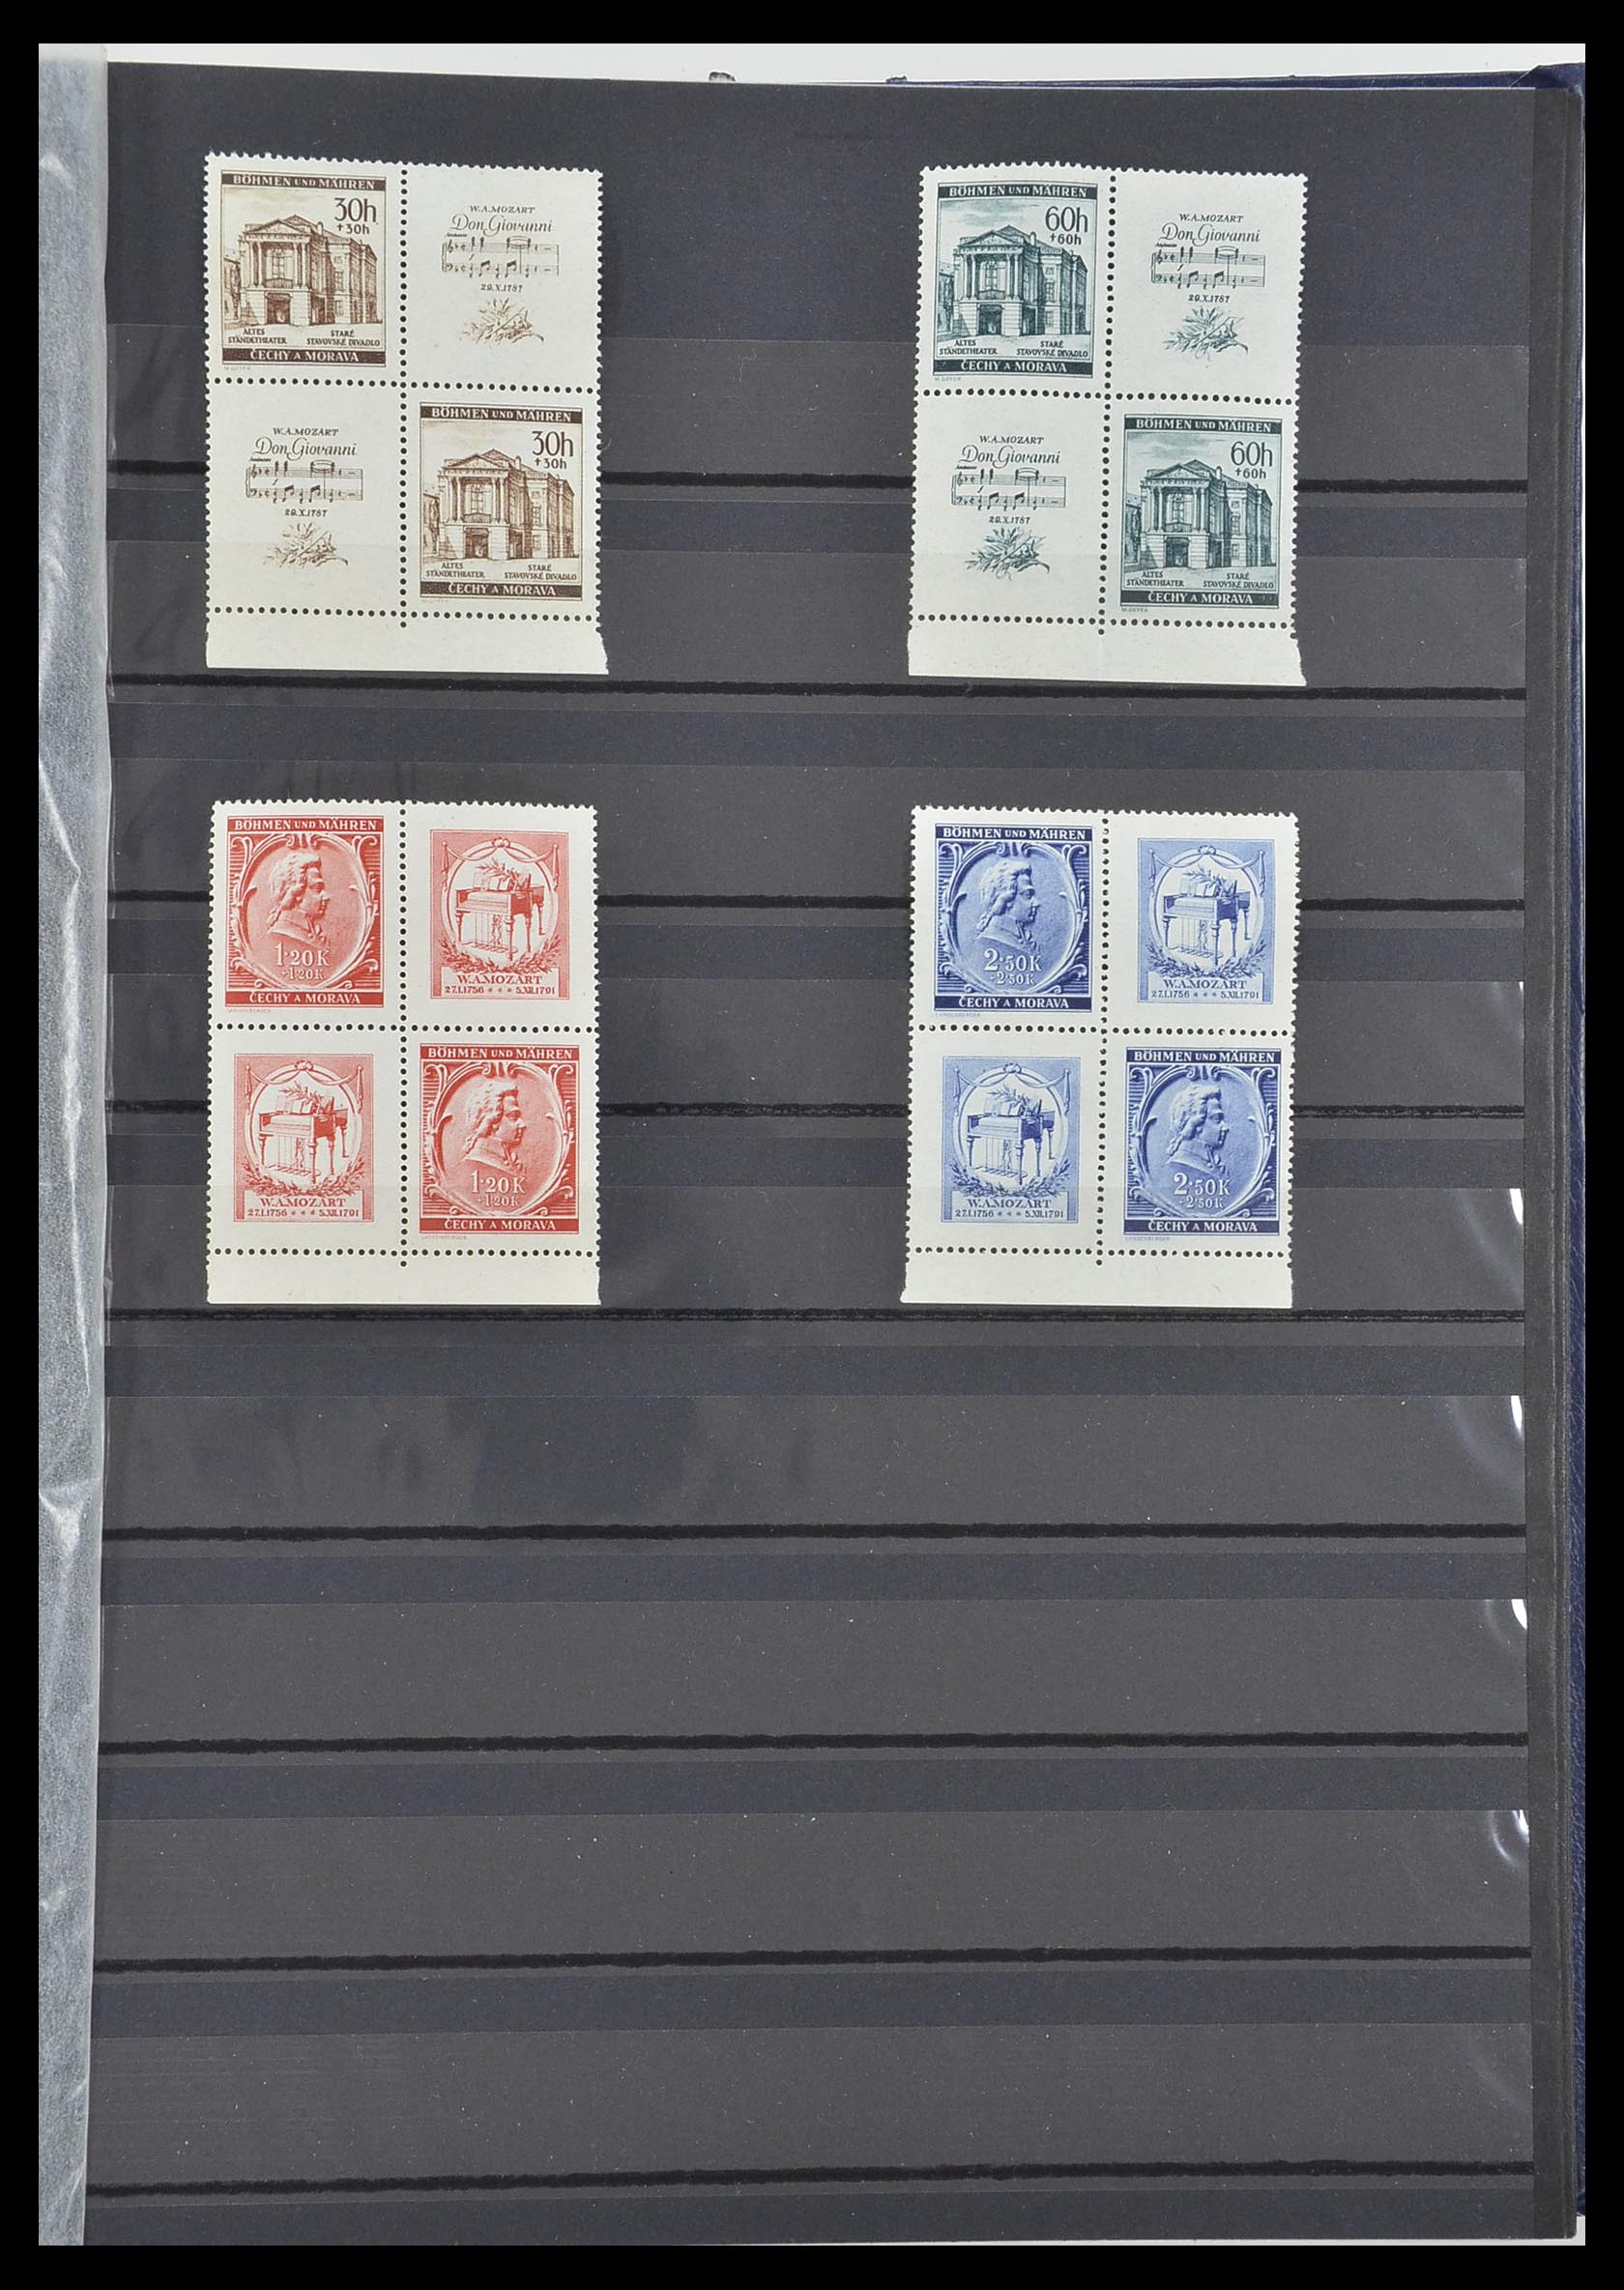 33553 061 - Stamp collection 33553 German territories and occupations 1939-1948.